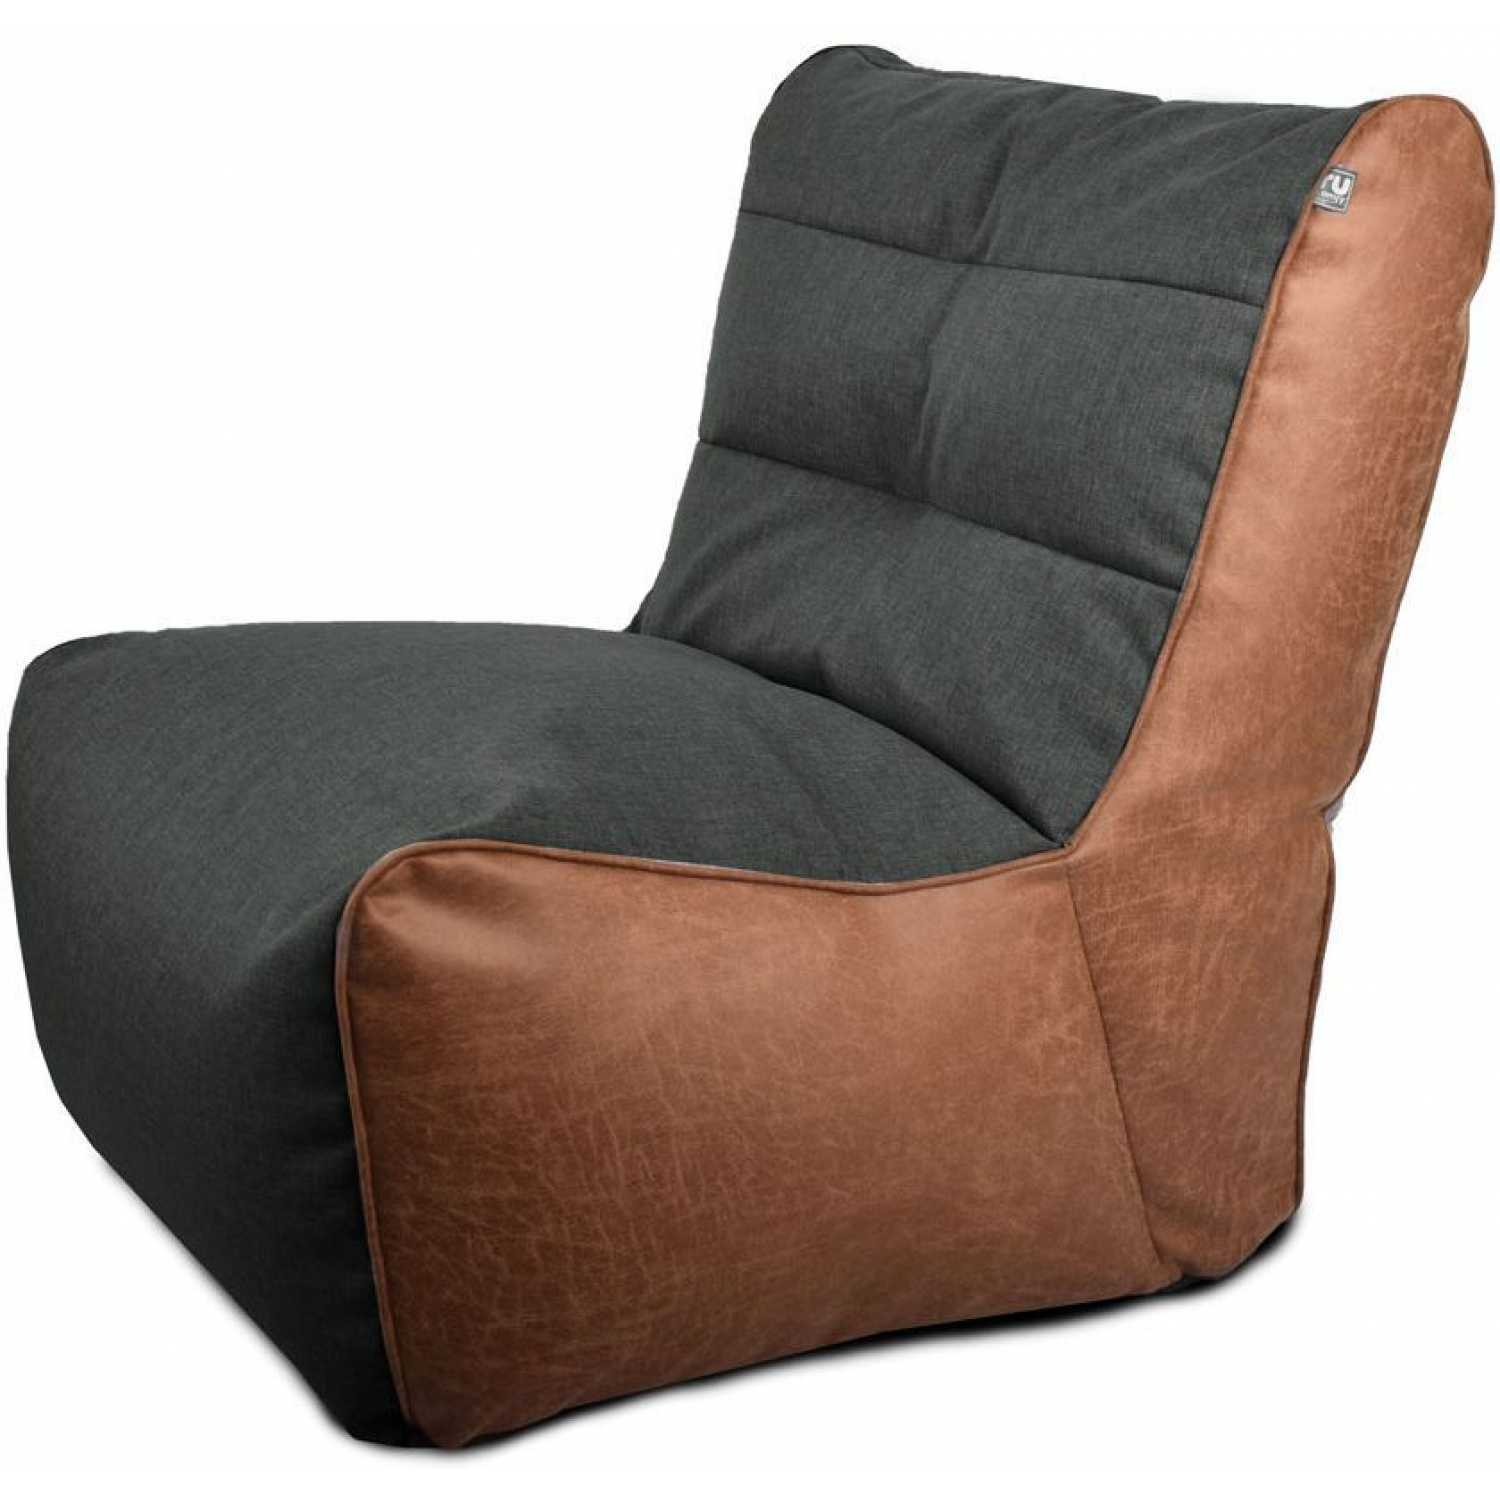 ucomfy Busby Chair Bean Bag - Charcoal